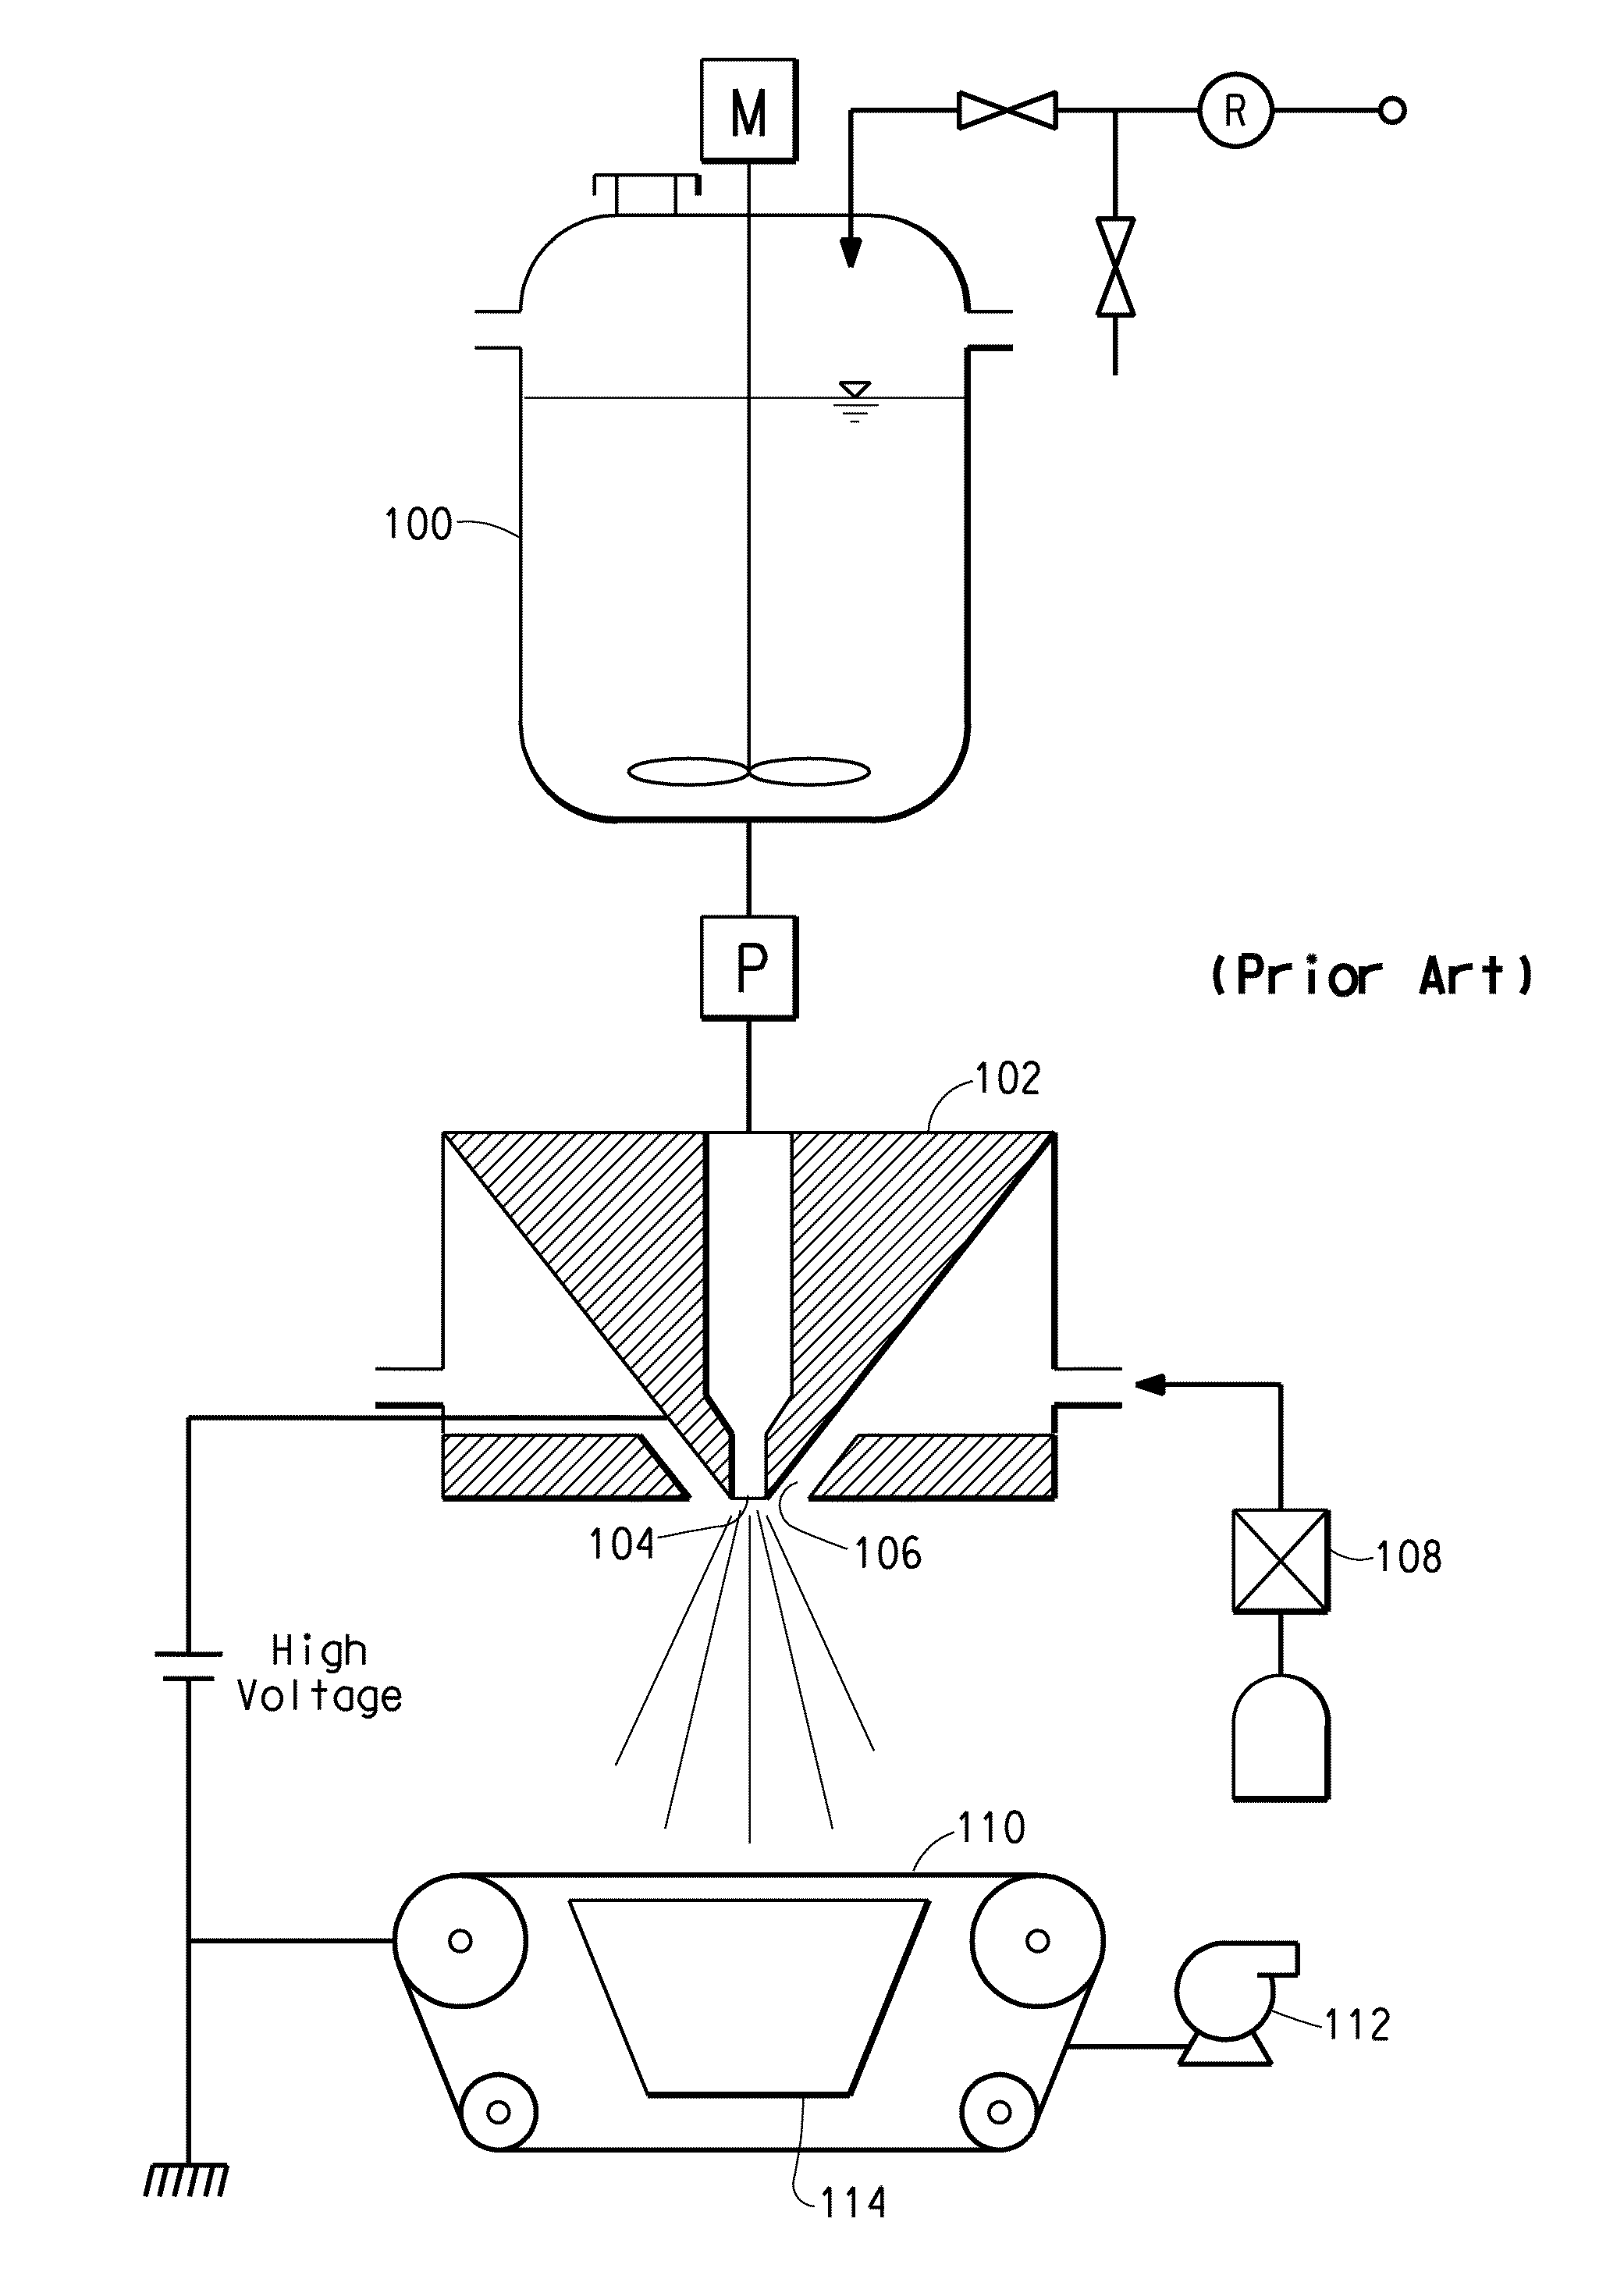 Fiber spinning process using a weakly interacting polymer